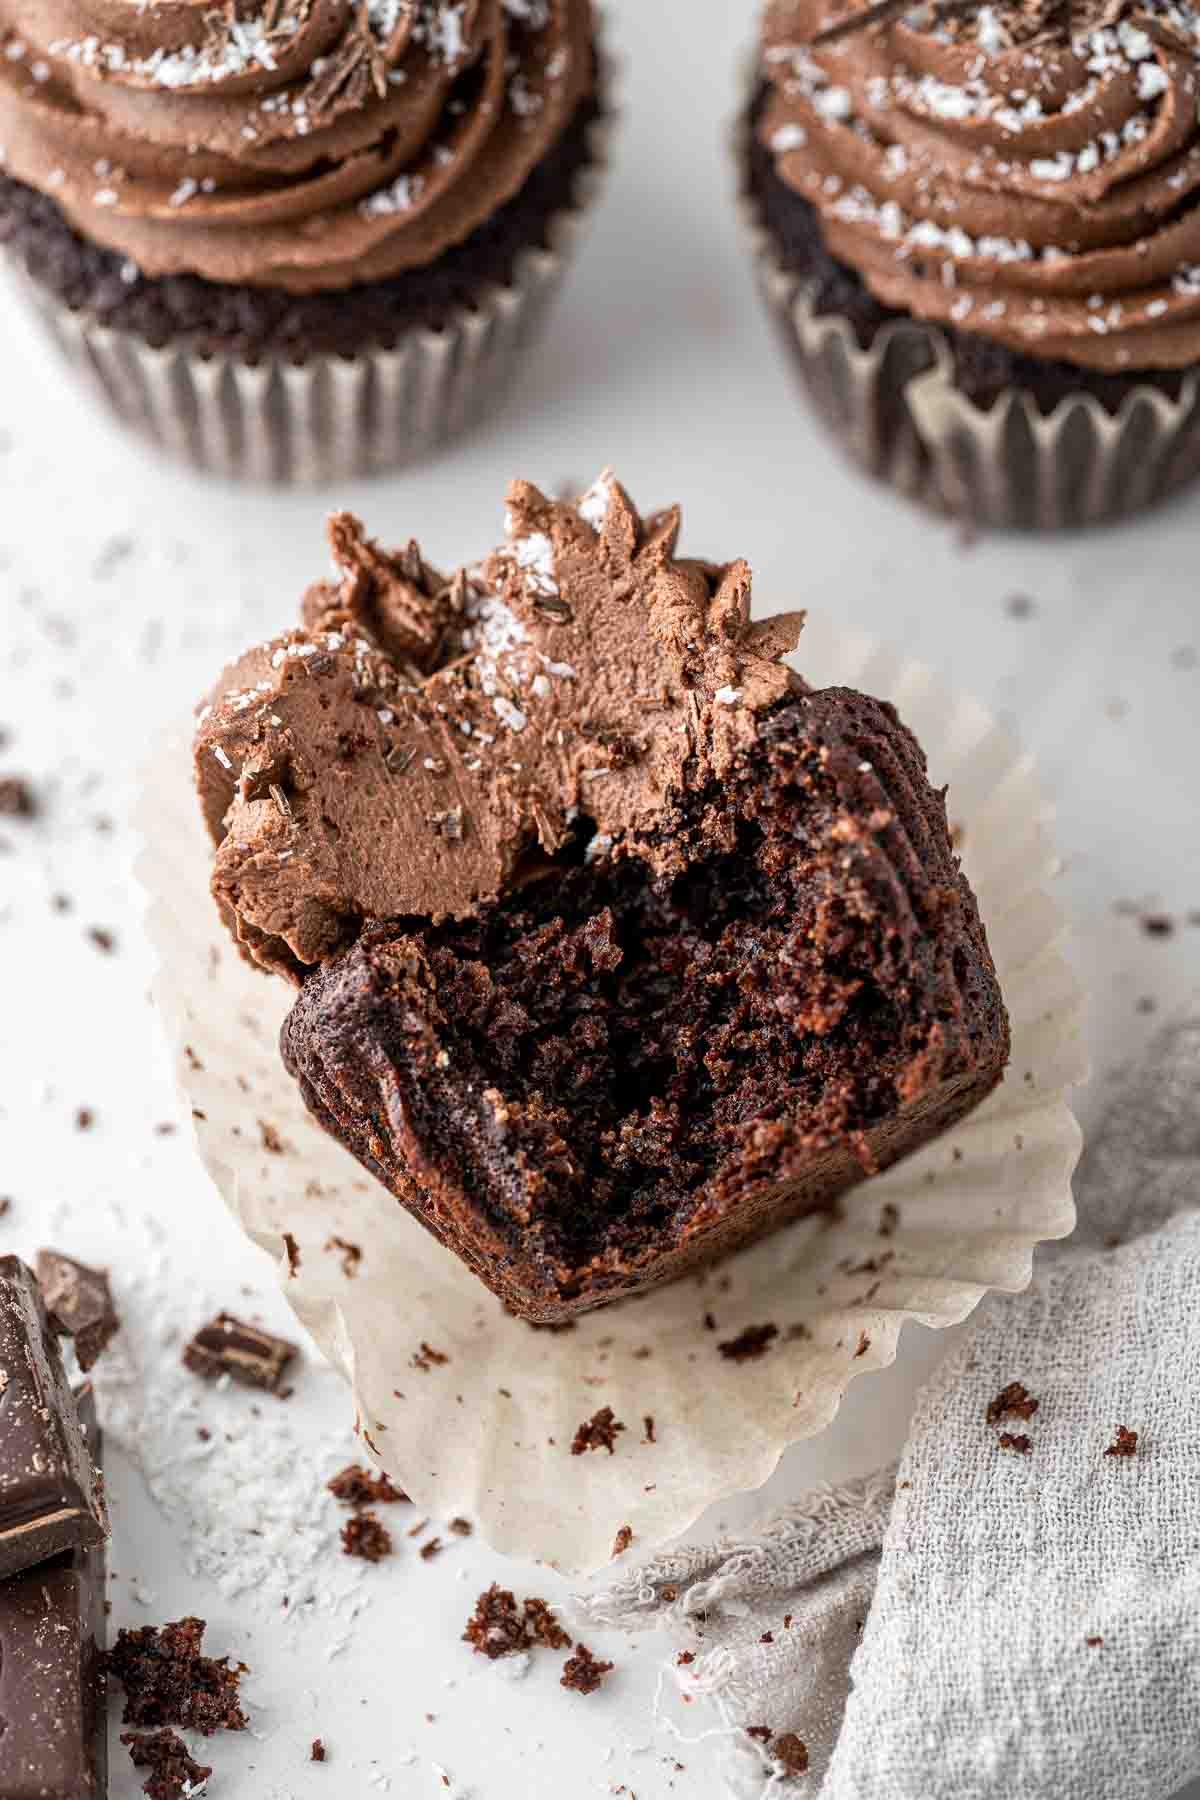 Close up of a chocolate and coconut cupcake with a bite taken.